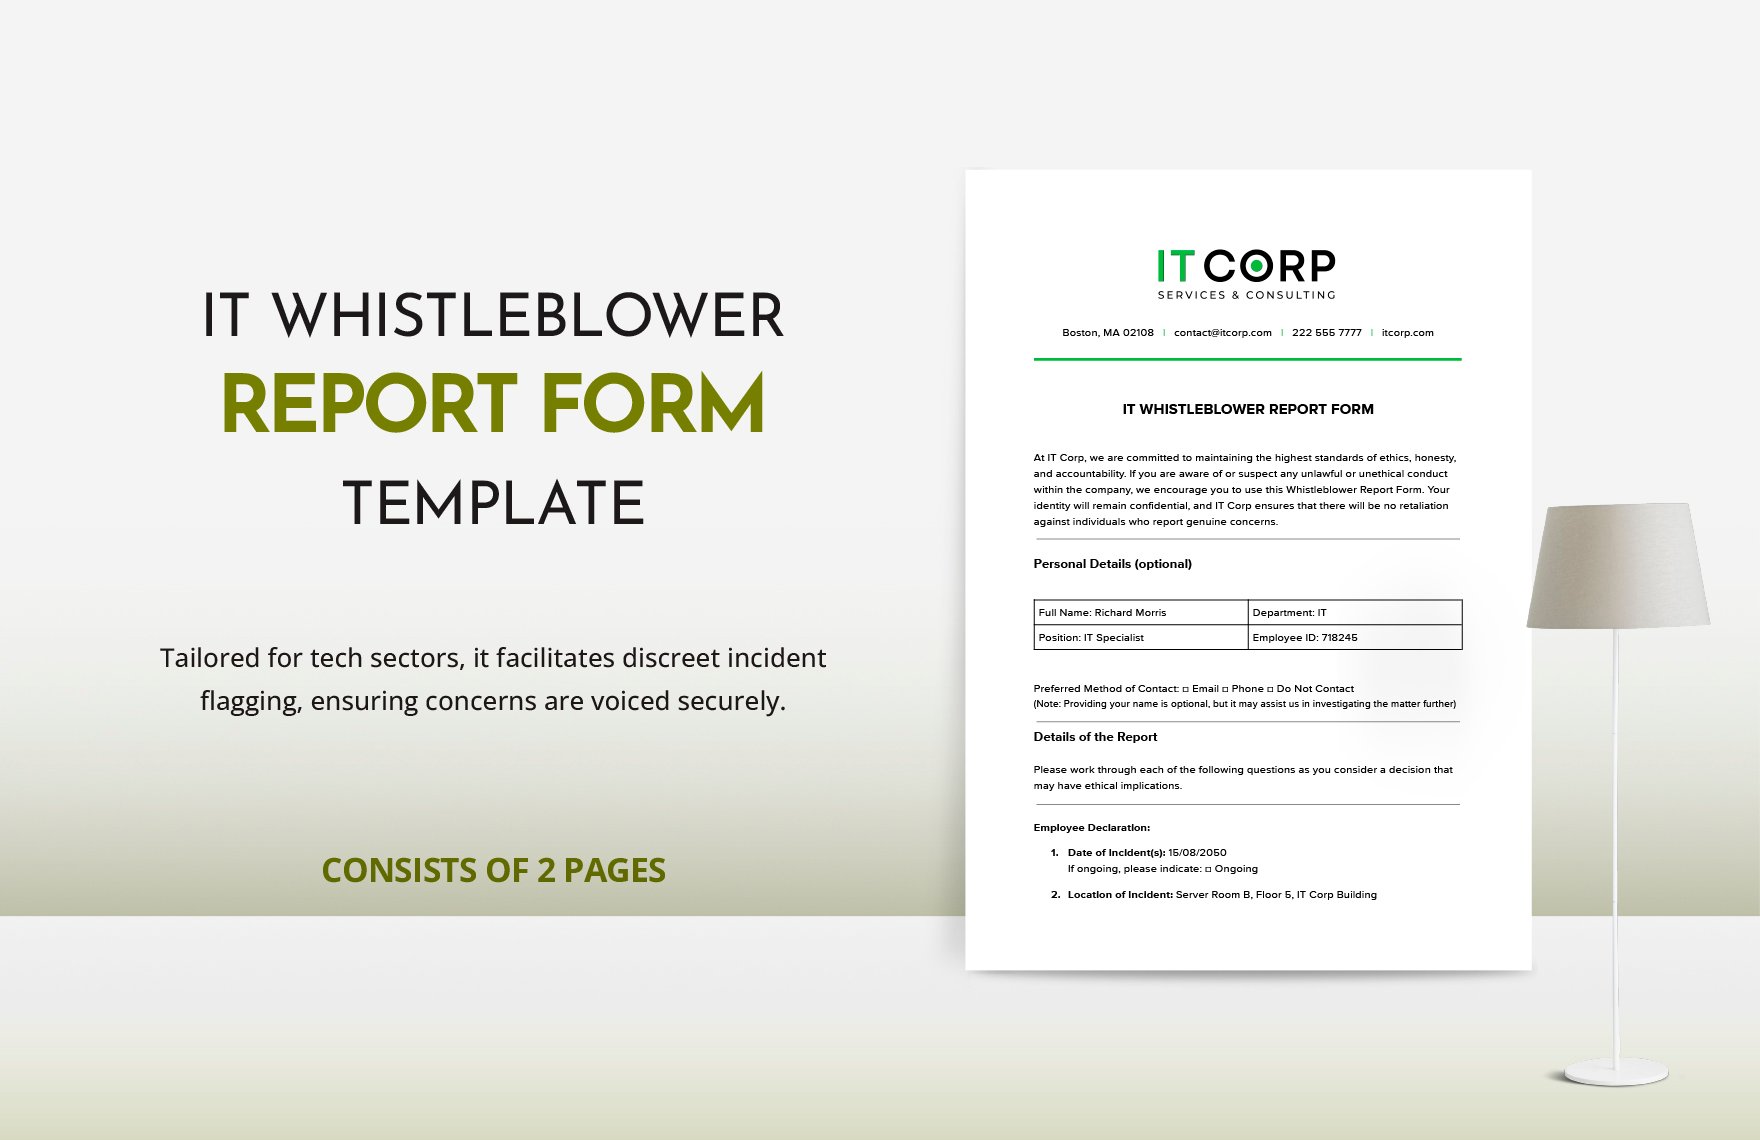 IT Whistleblower Report Form Template